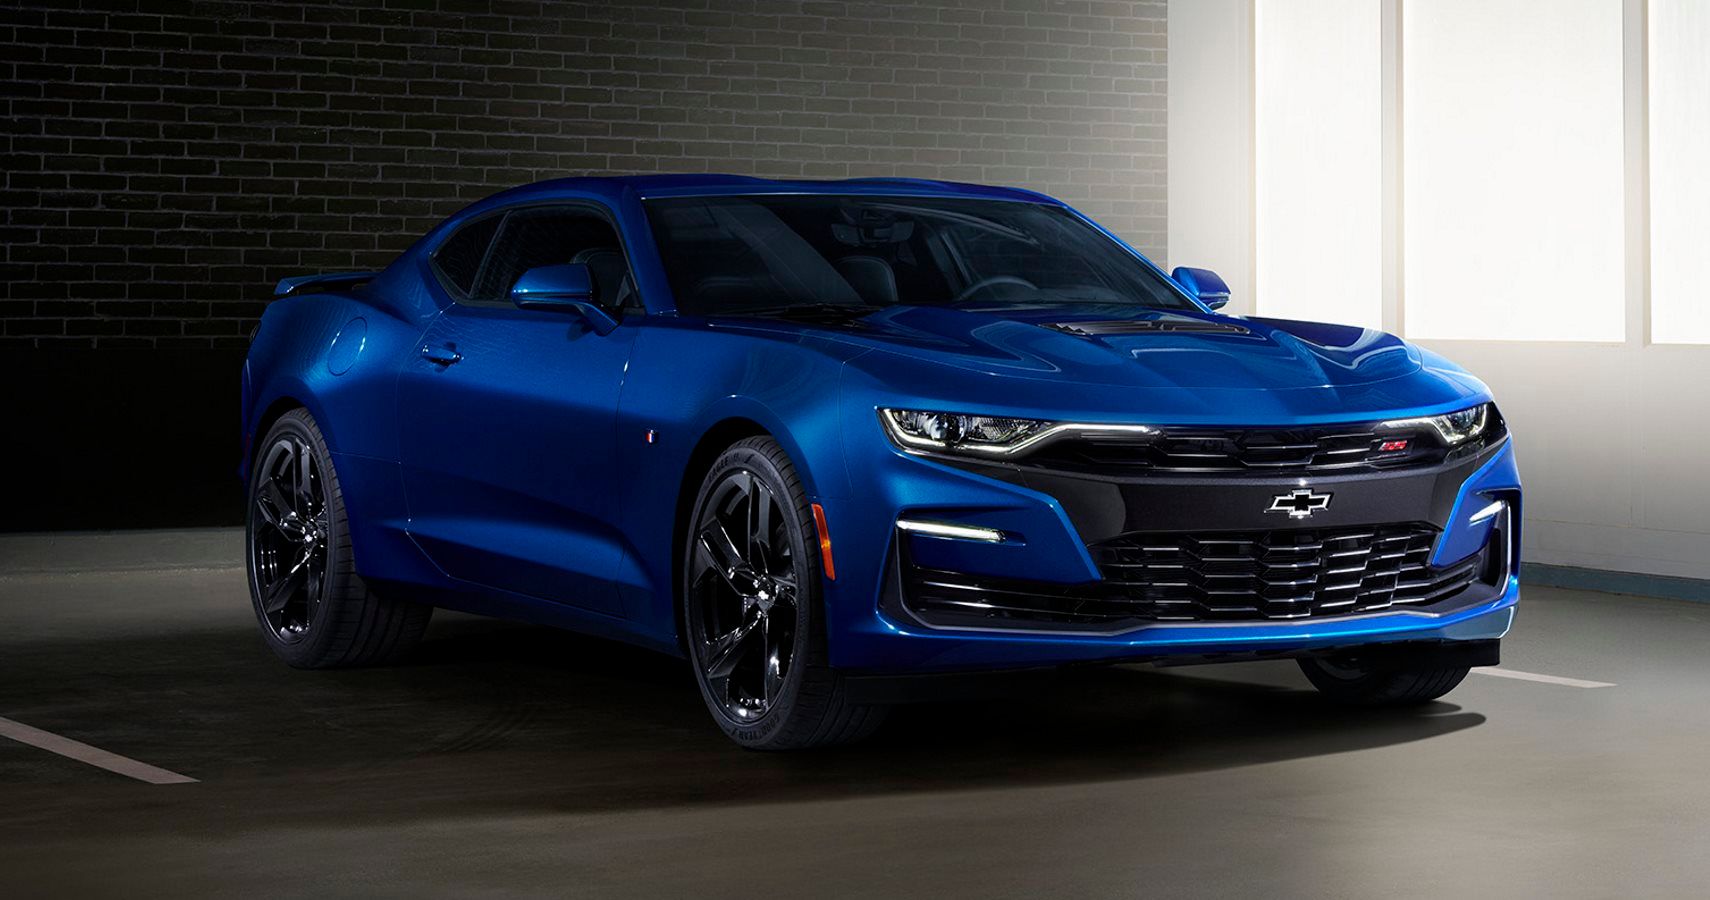 2019 Camaro Configurator Is Officially Live